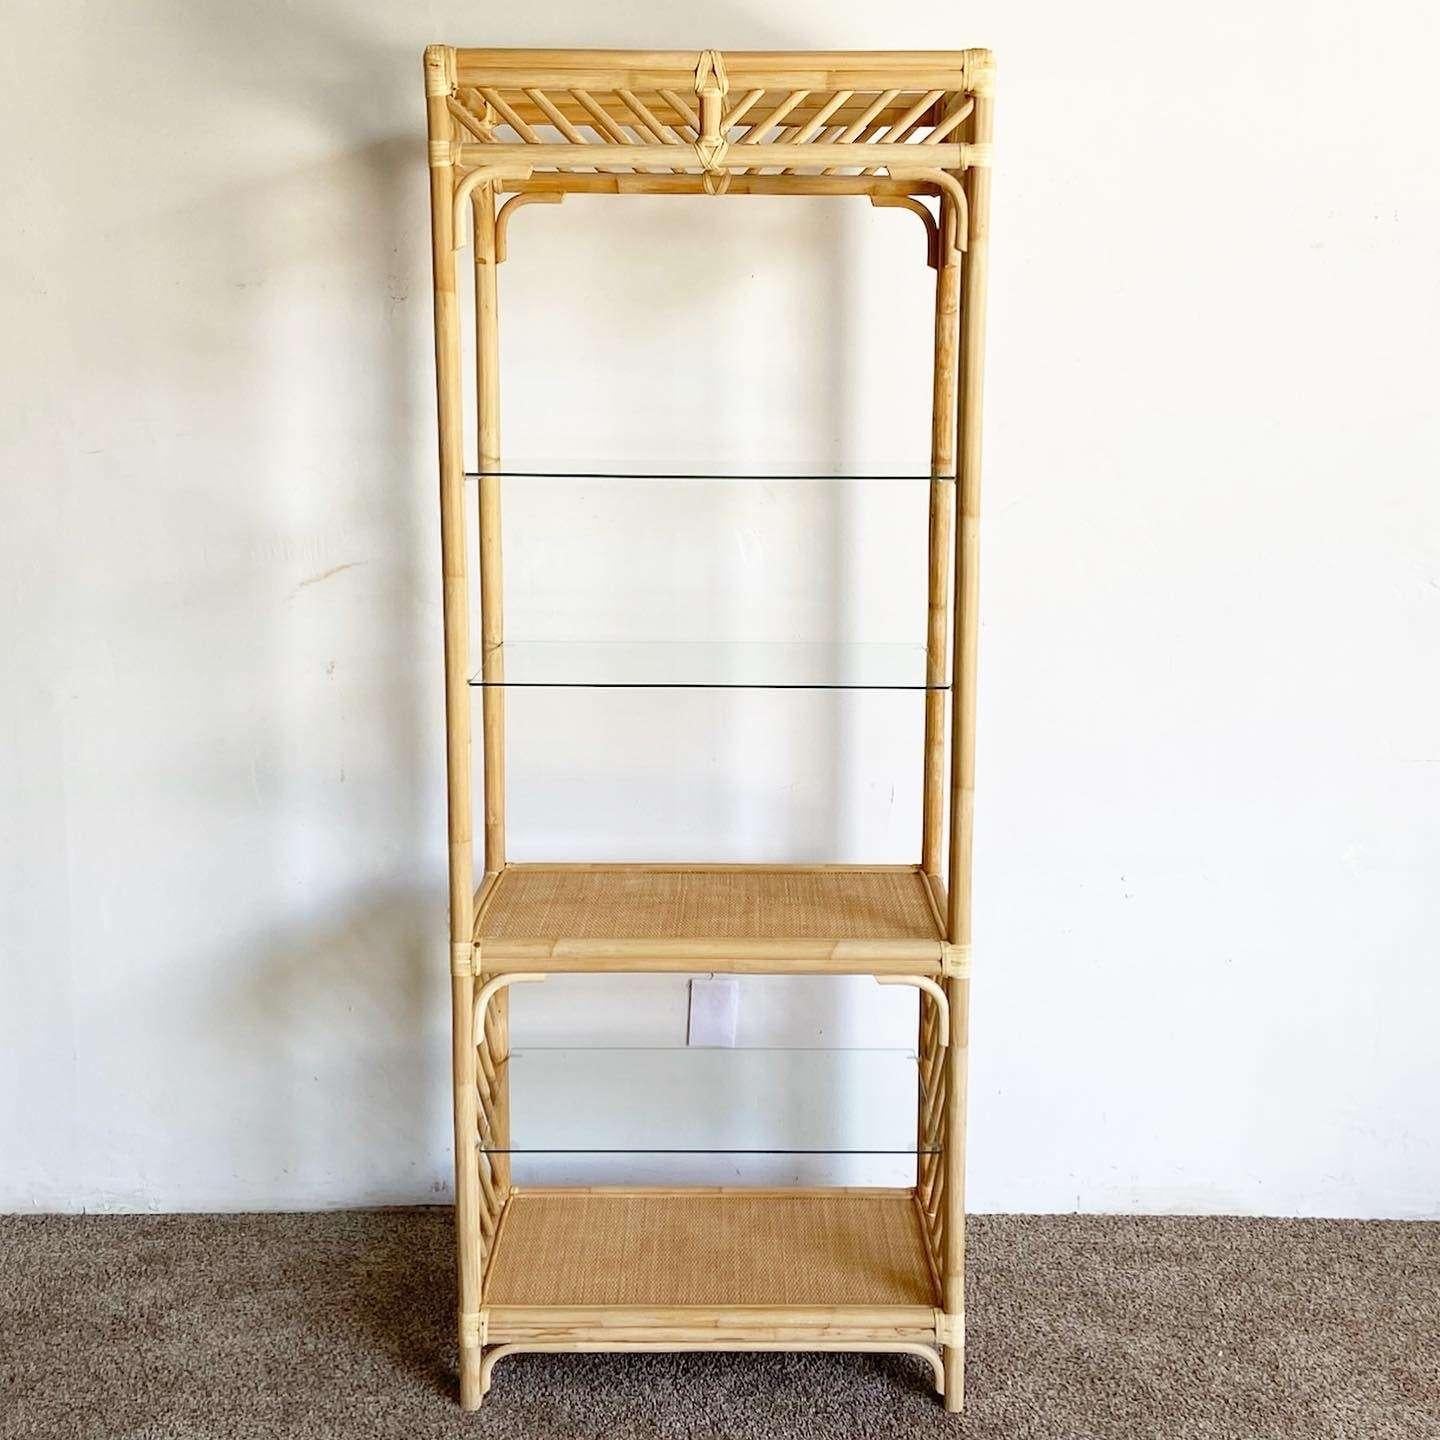 Late 20th Century Boho Chic Bamboo Rattan Etagere - 4 Shelves For Sale